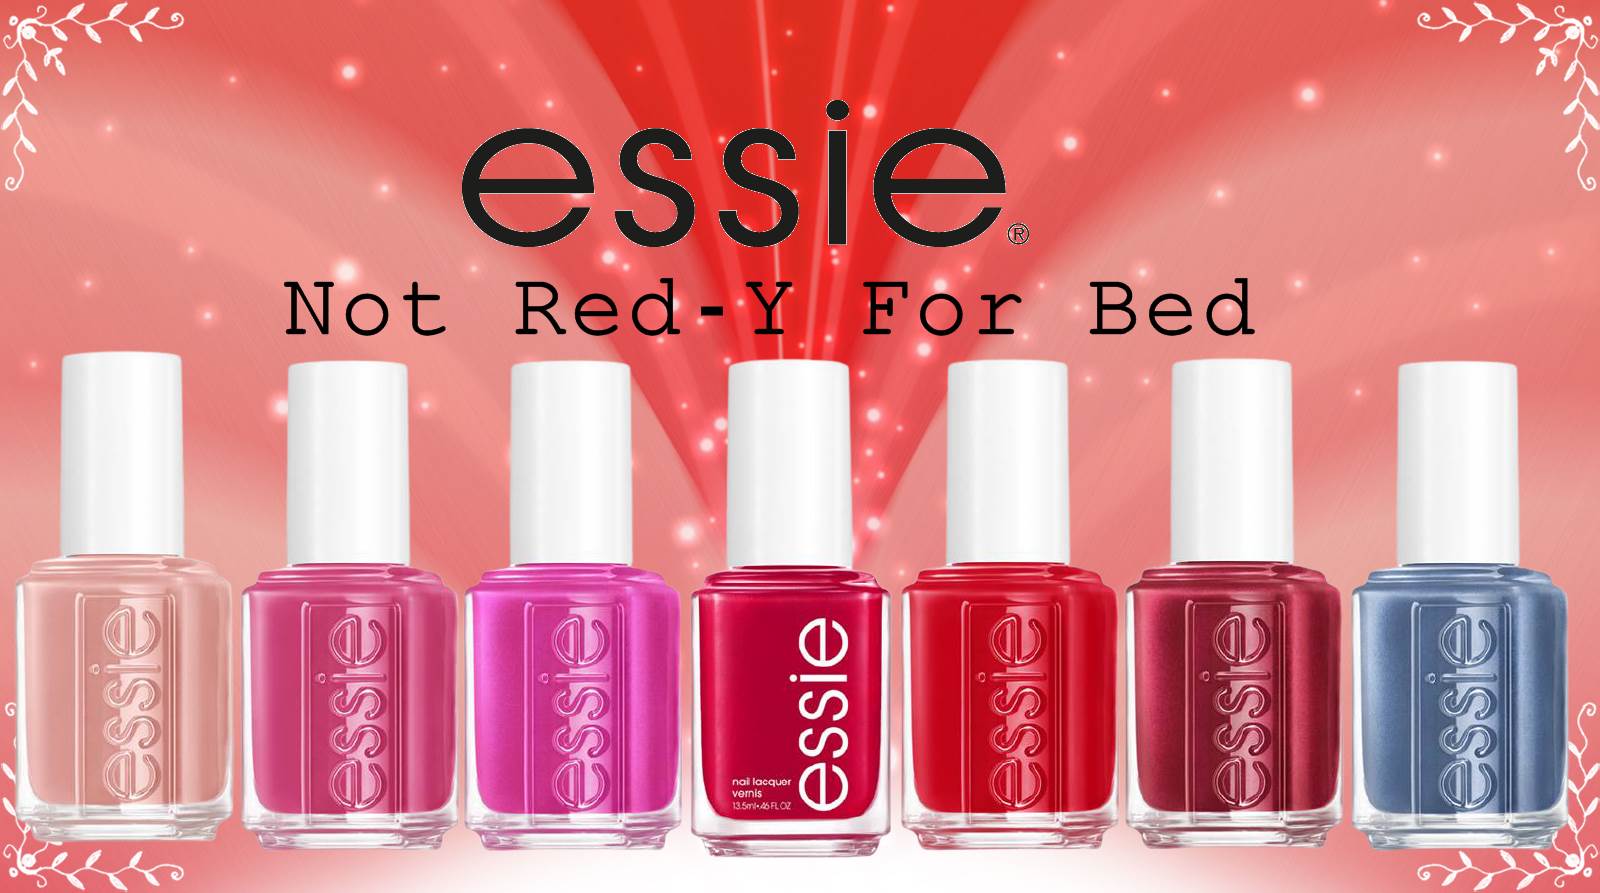 Essie Not Red-y For Essie Nail & Polish Review Images Collection – Bed